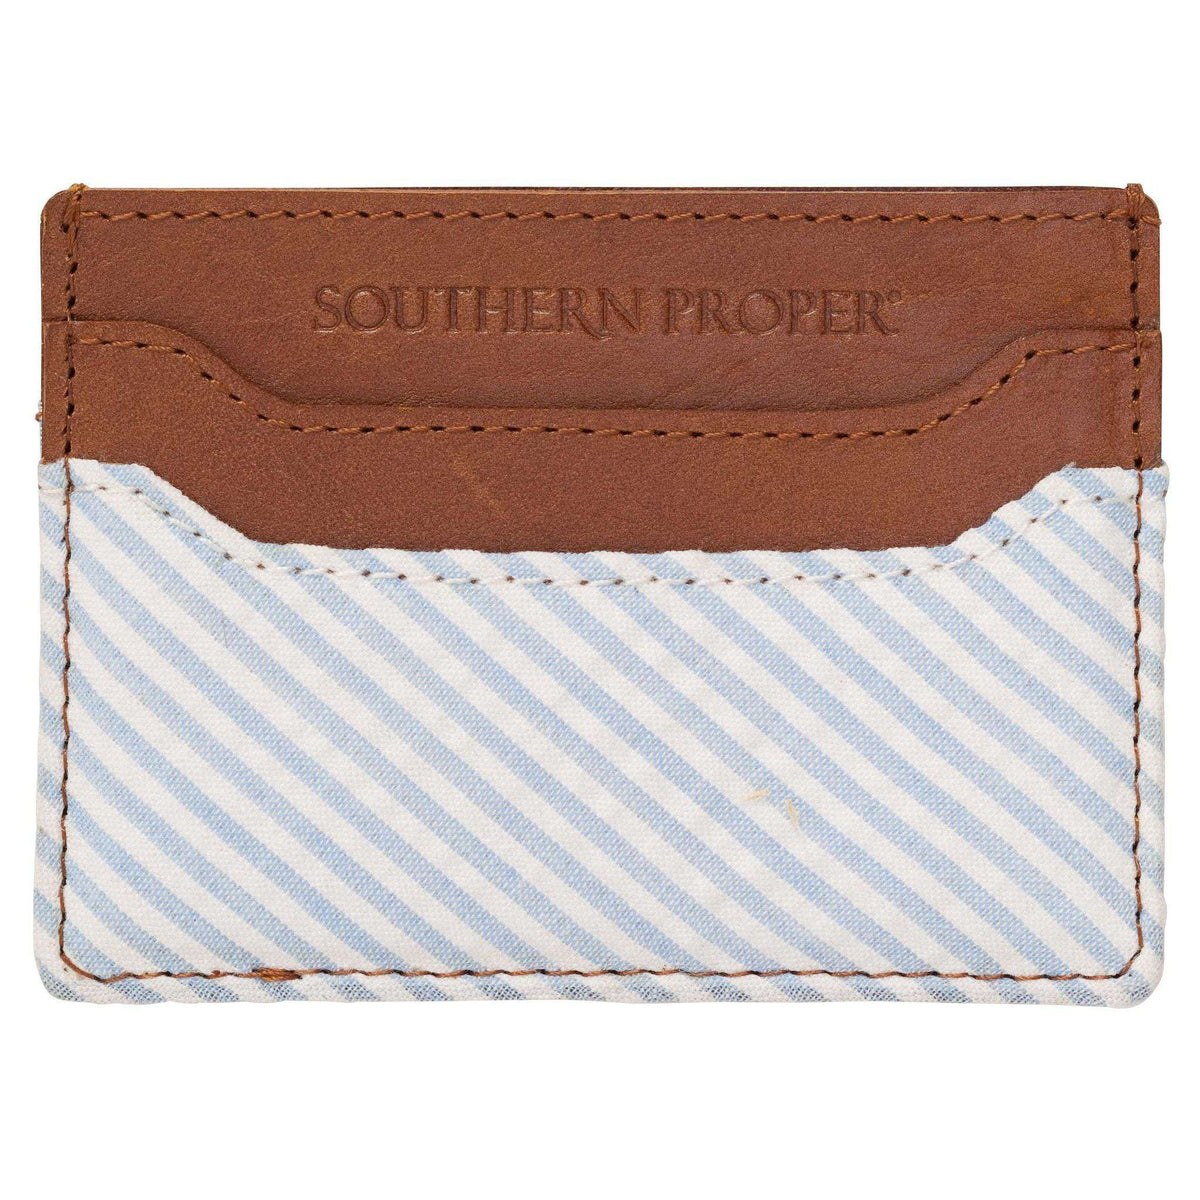 Proper Card Case in Blue/White Seersucker by Southern Proper - Country Club Prep